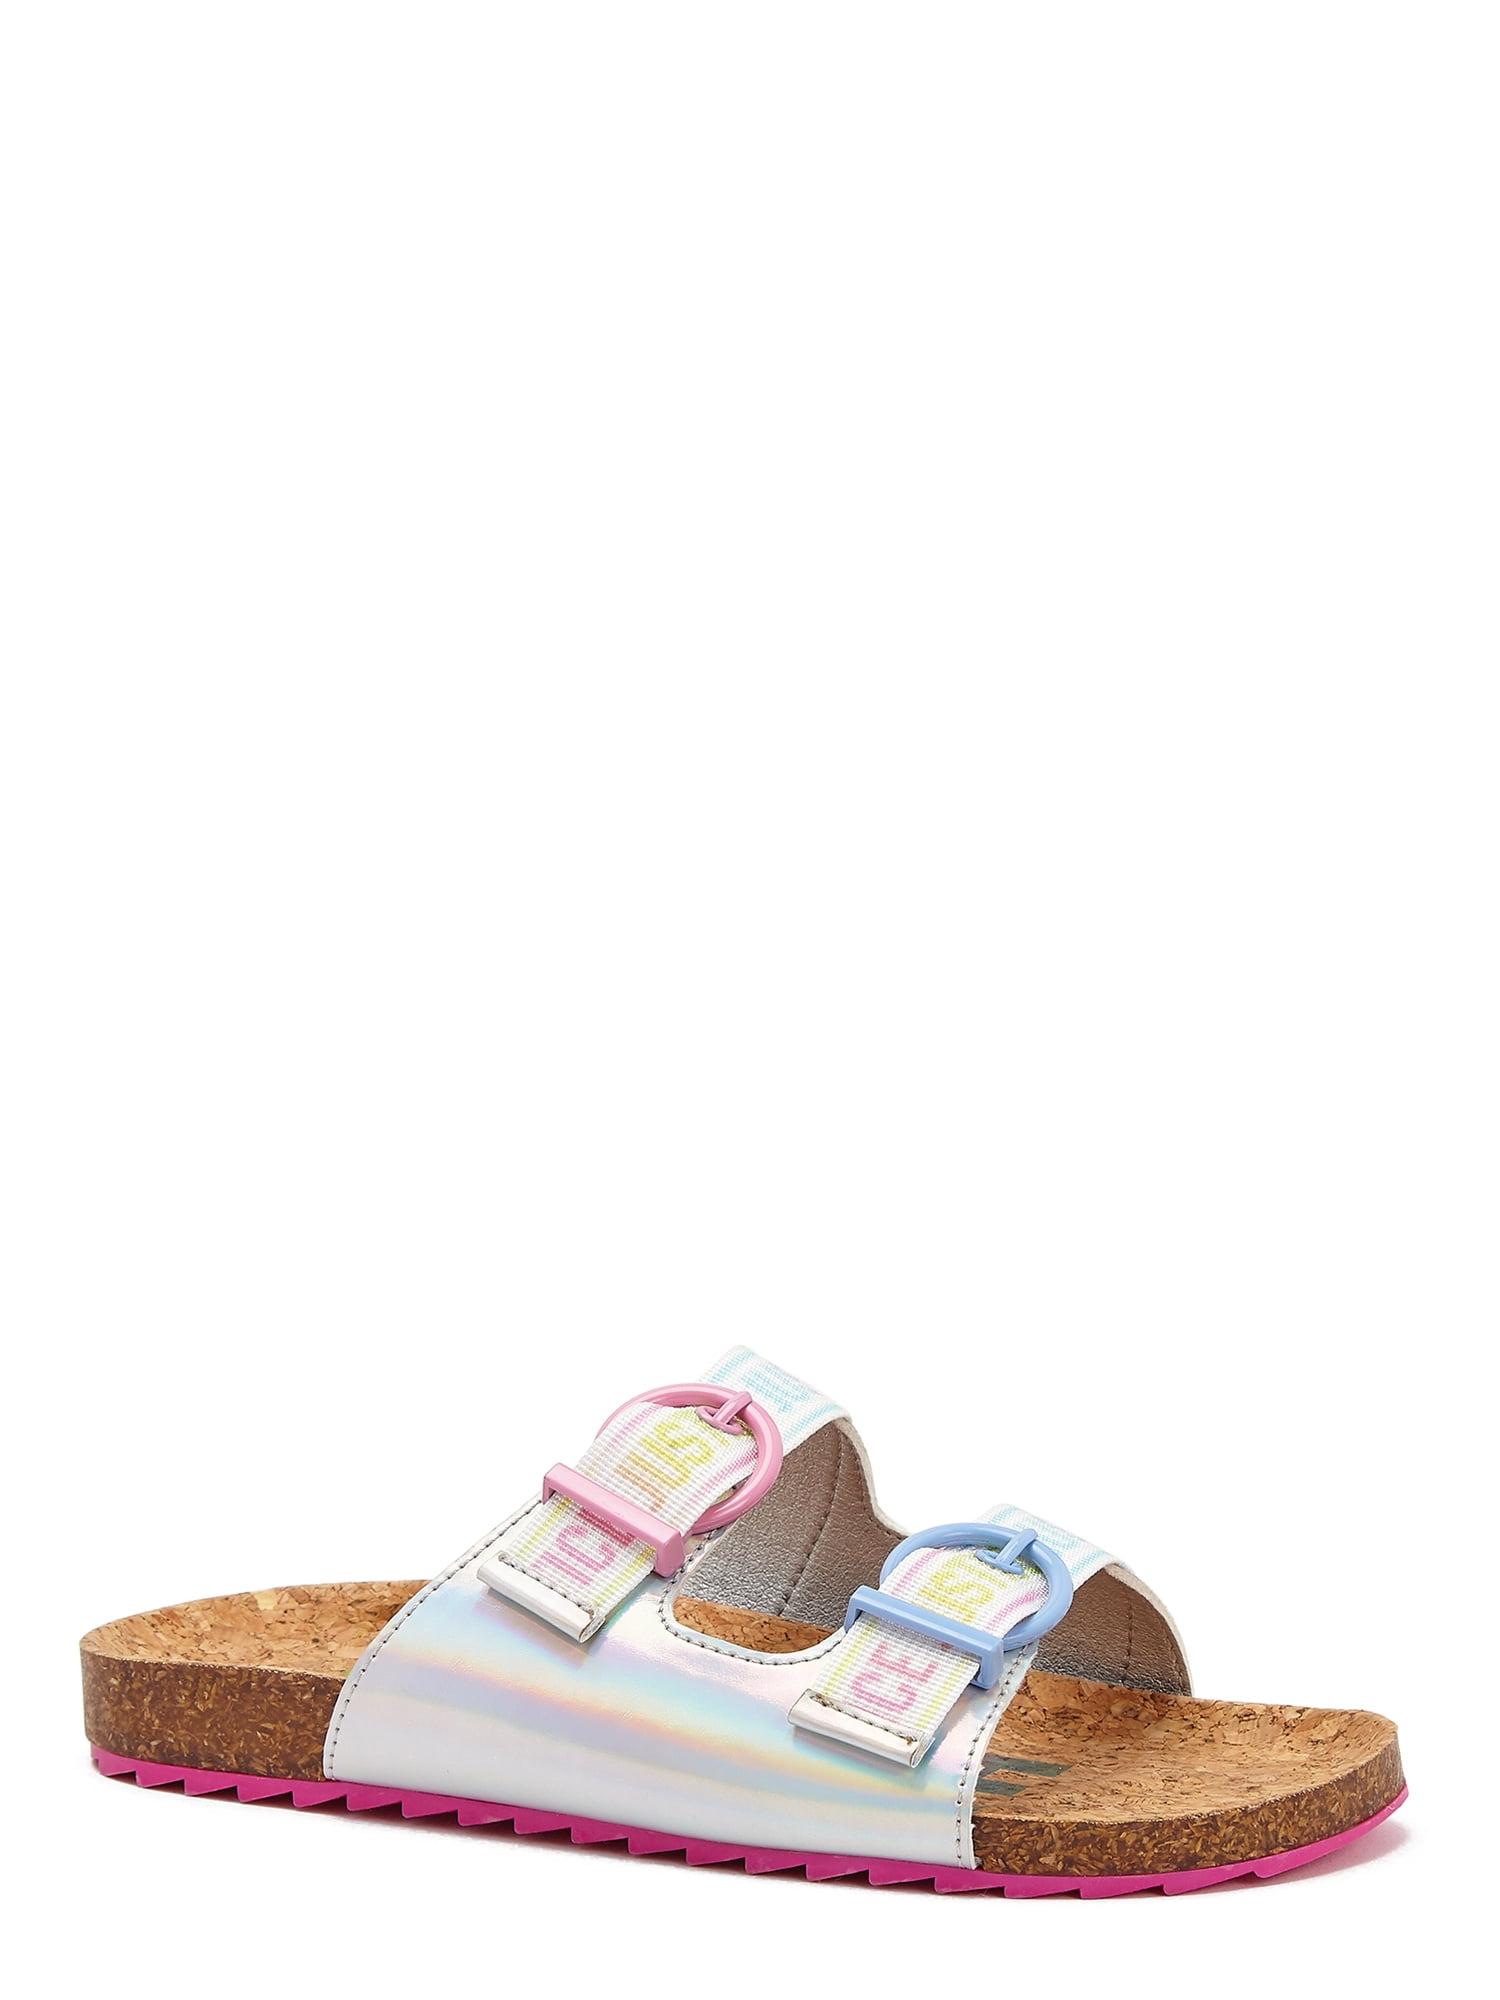 Girls Summer Sandals Iridescent Footbed Mules Holographic Comfort Shoes Size 